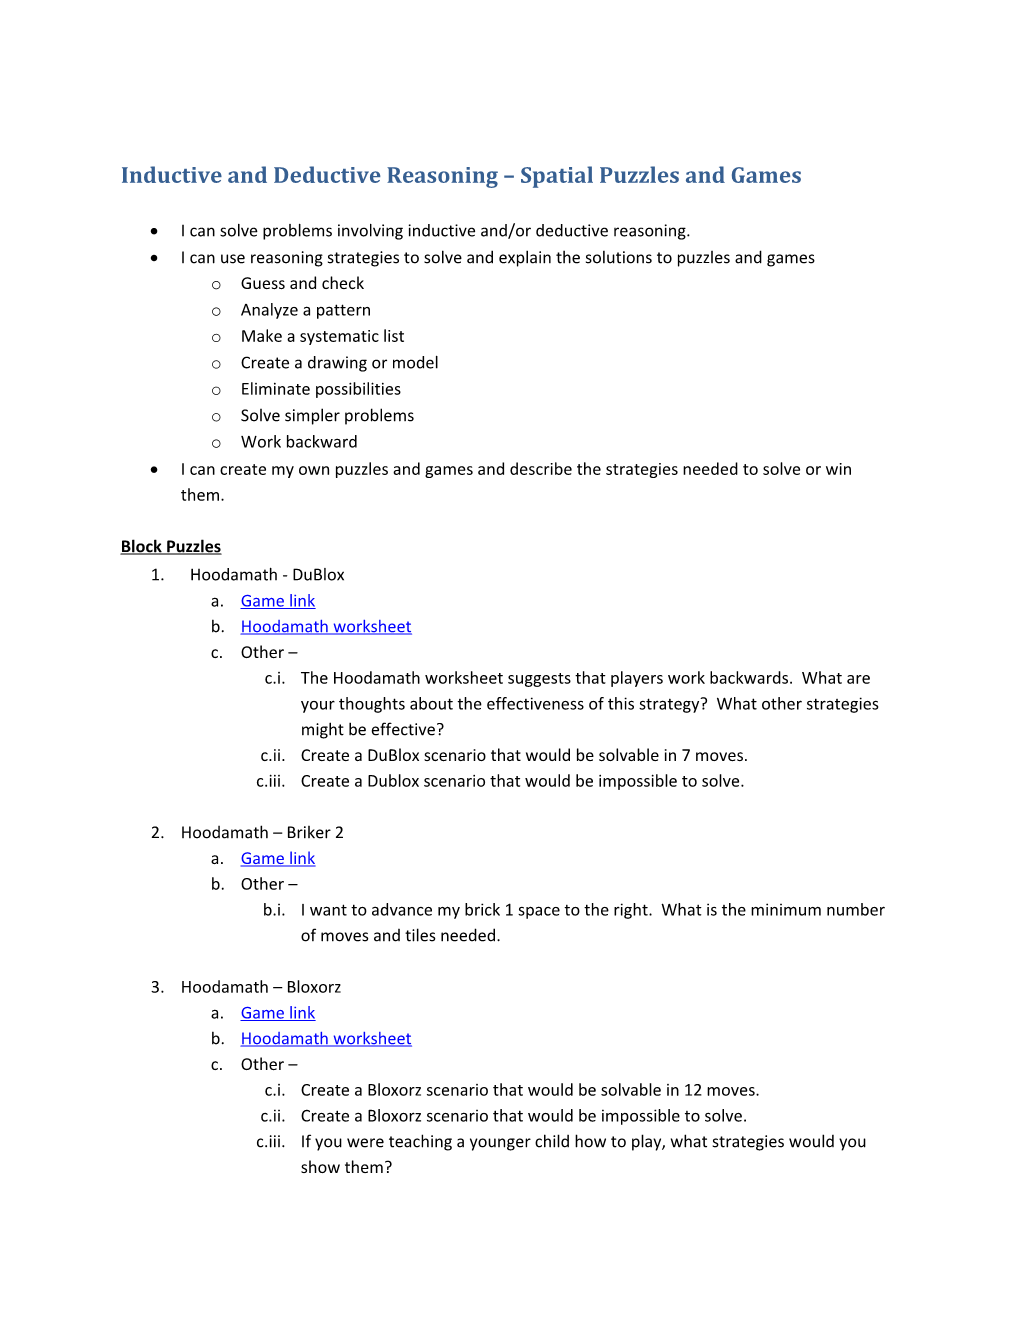 Inductive and Deductive Reasoning Spatial Puzzles and Games